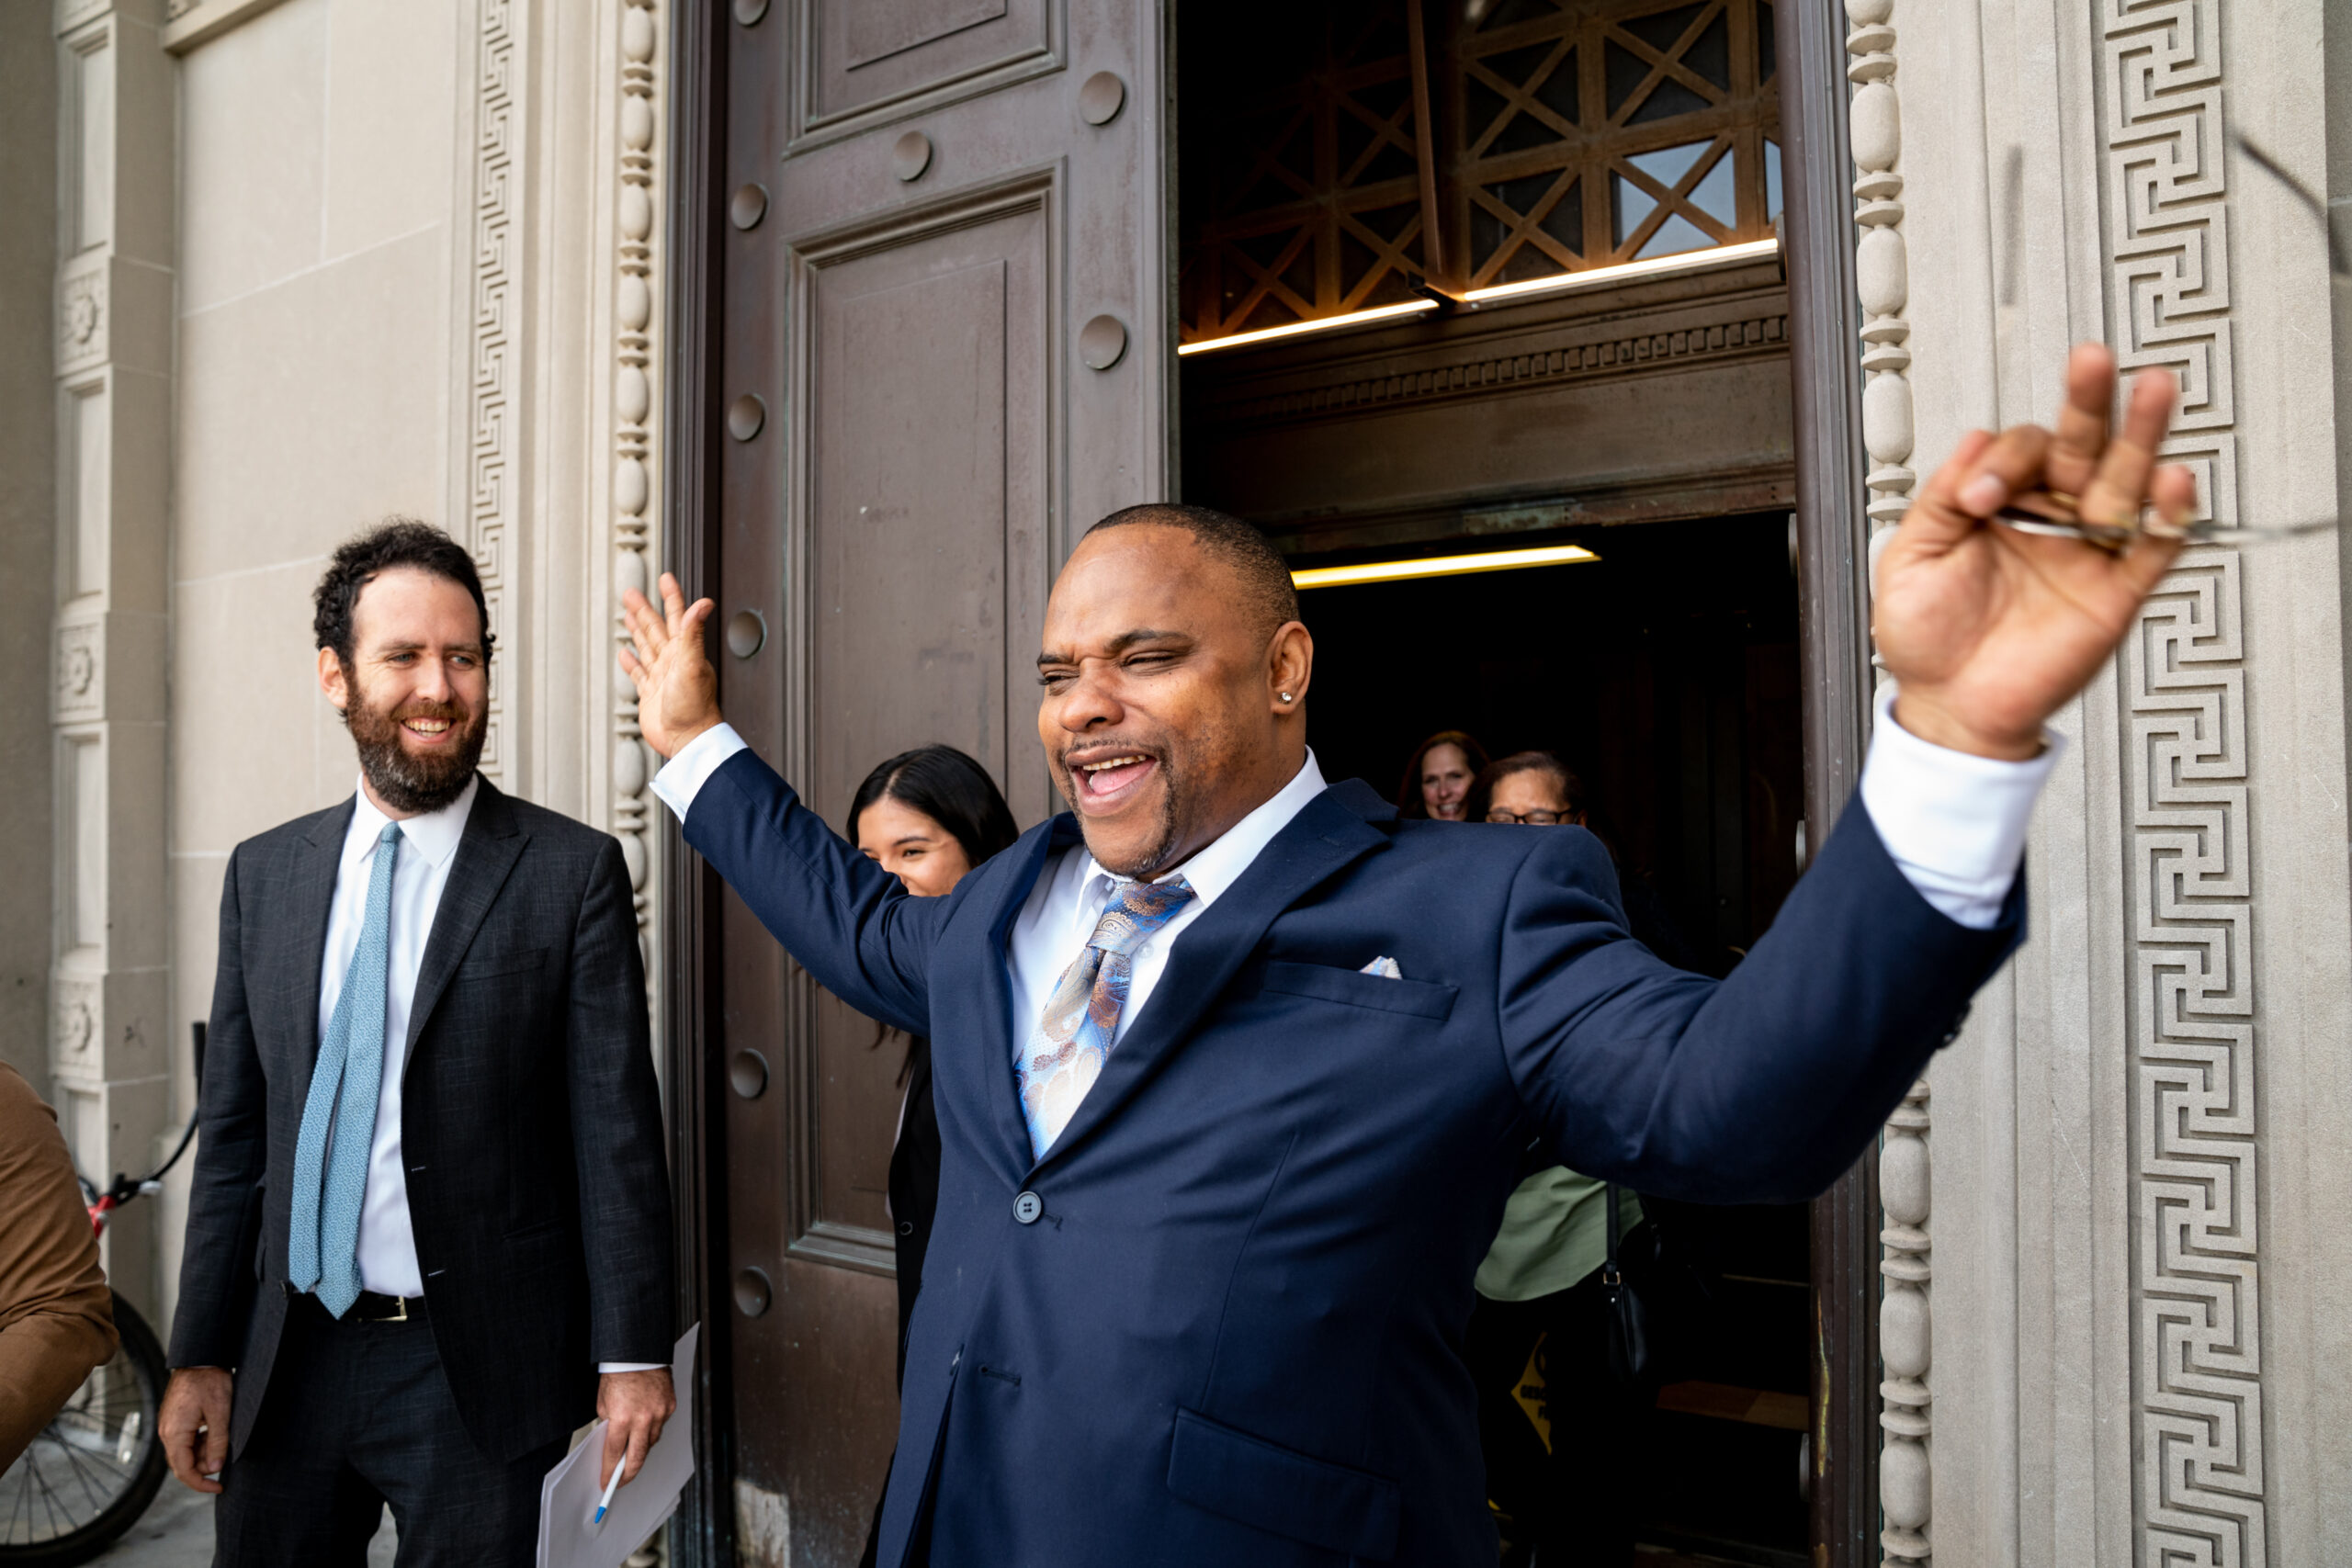 Darrill Henry leaving the Orleans Parish Criminal Court in January 2023. (Image: Claire Bangser/Innocence Project)